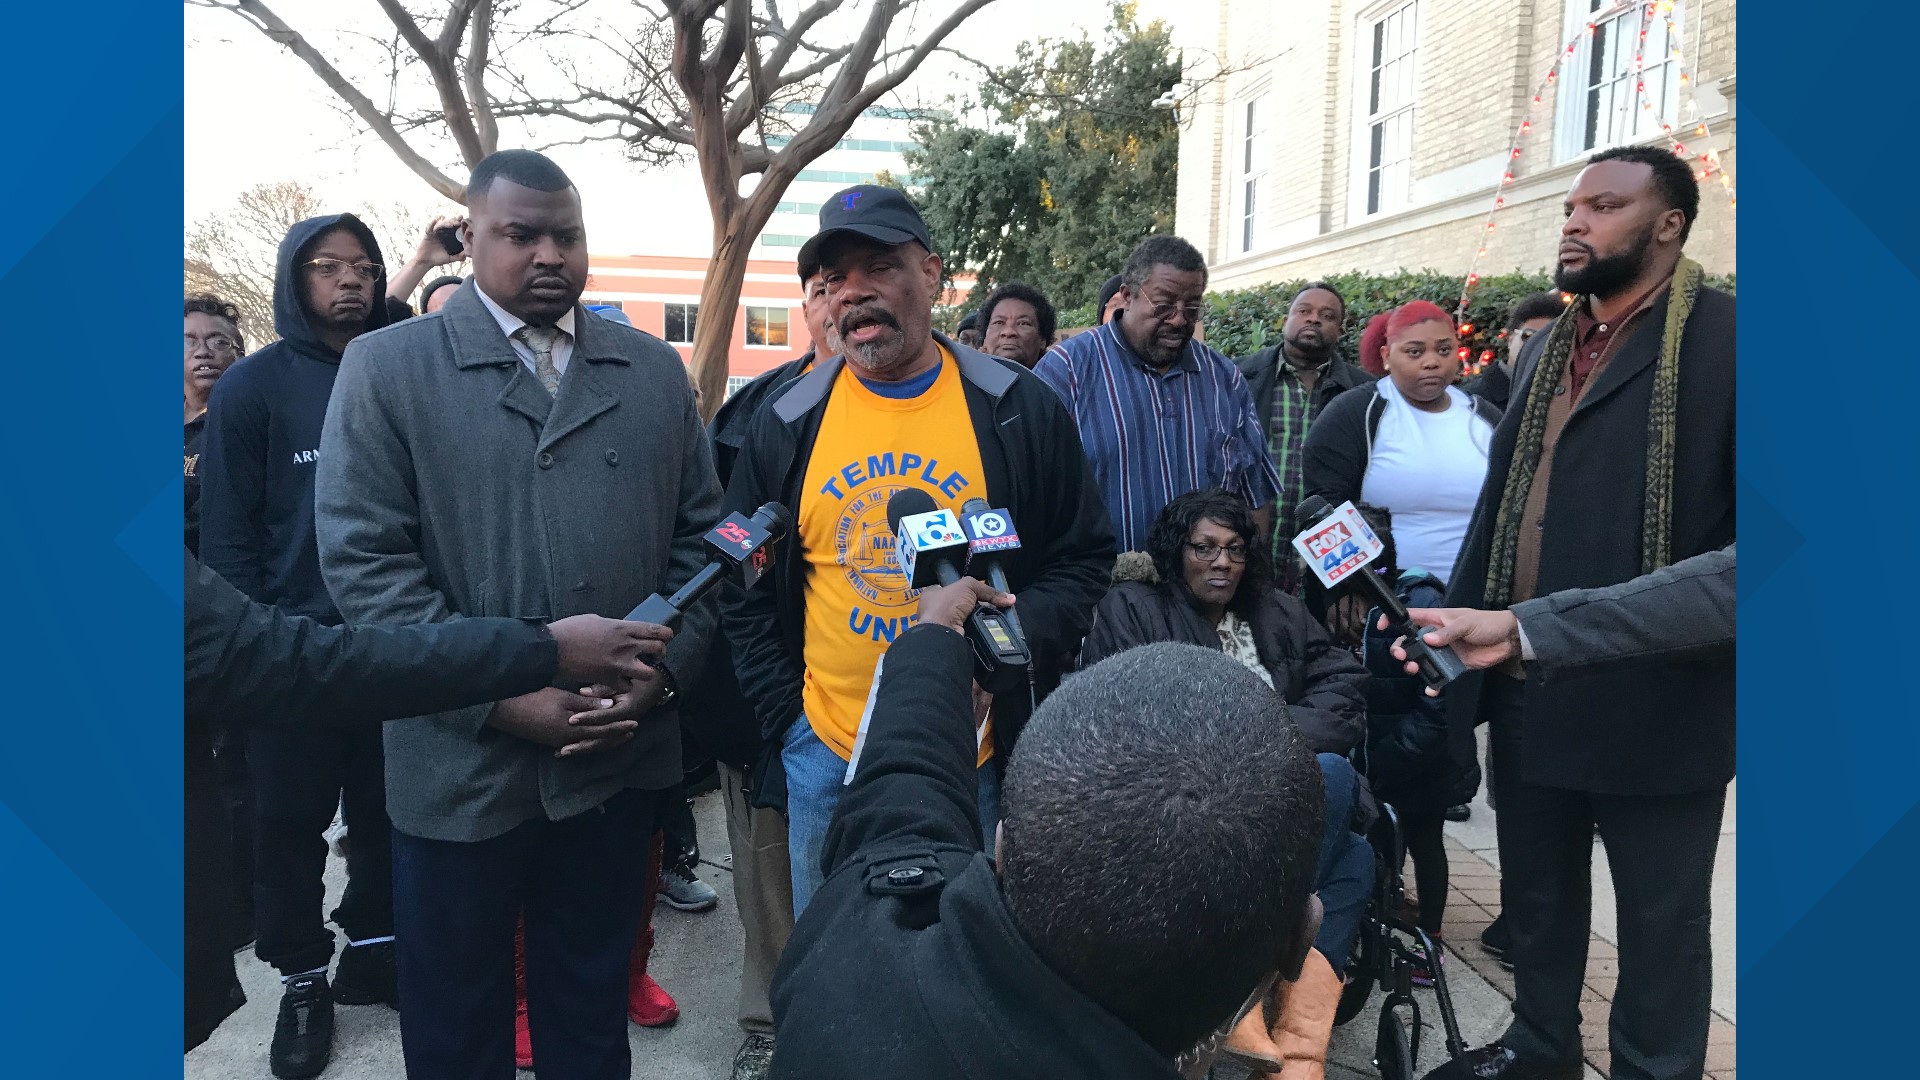 The Temple branch of the NAACP responded to the death of Michael Dean at a public press conference Wednesday.